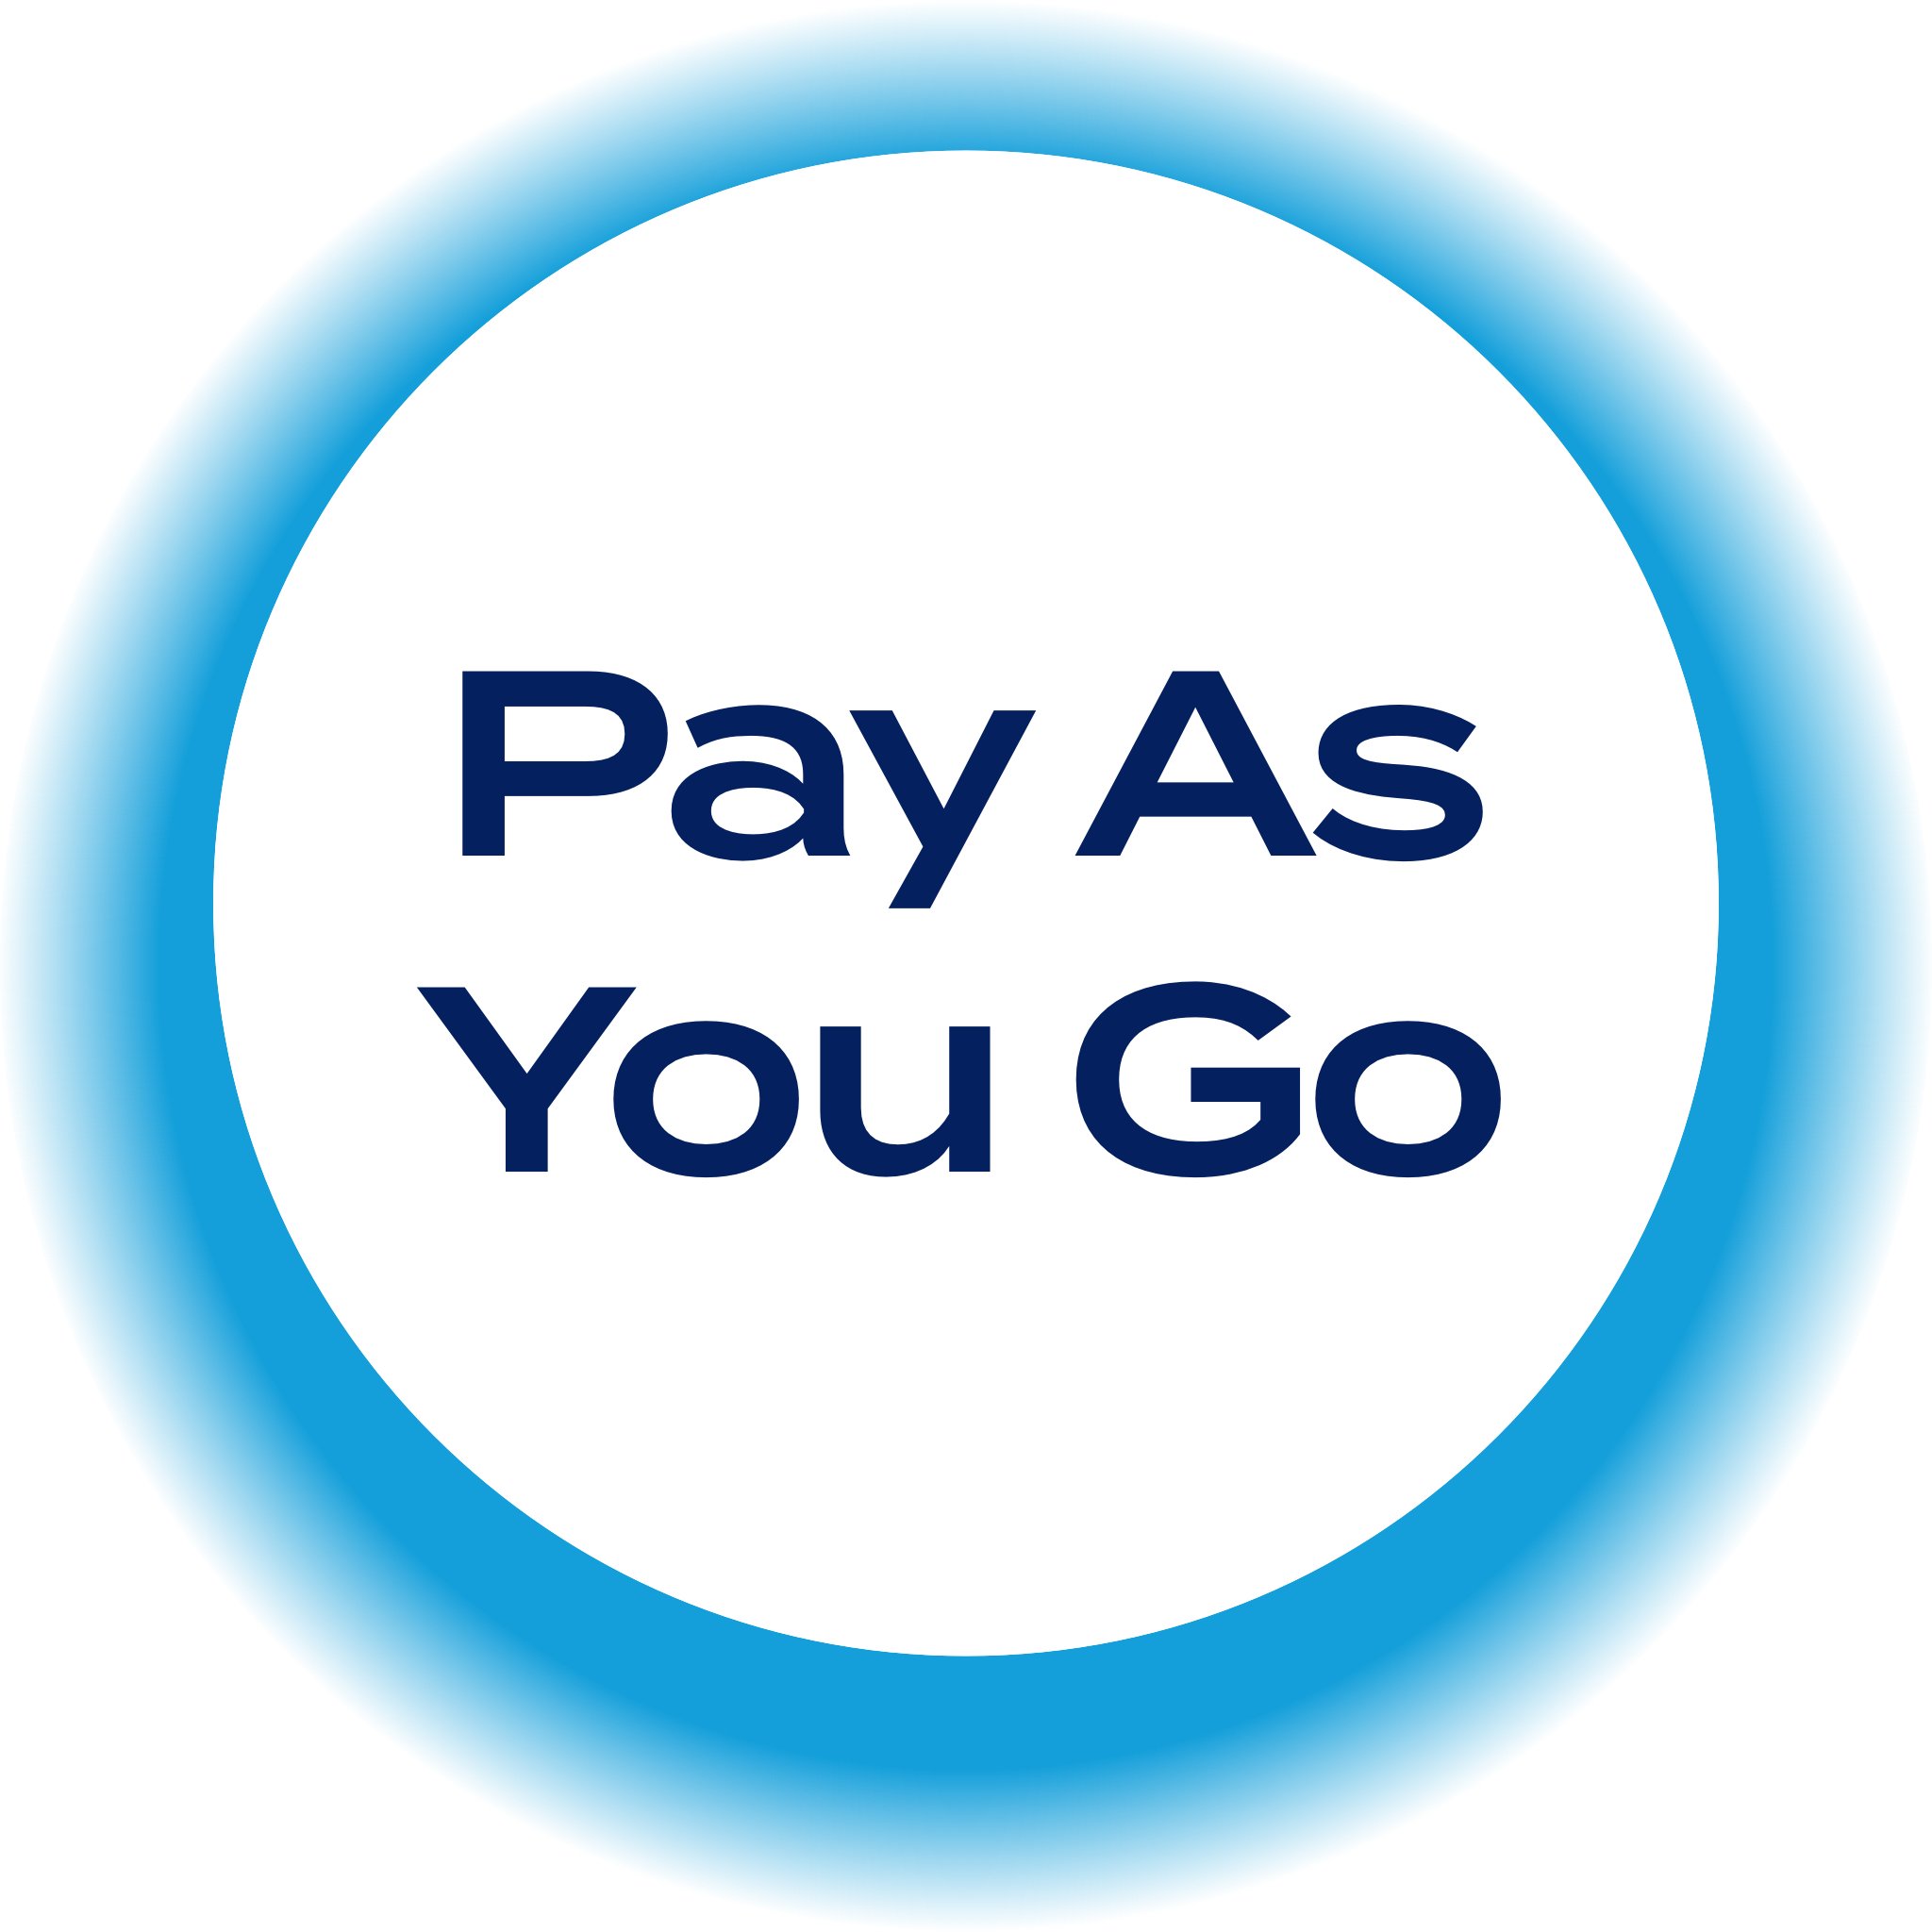 Pay as you go image